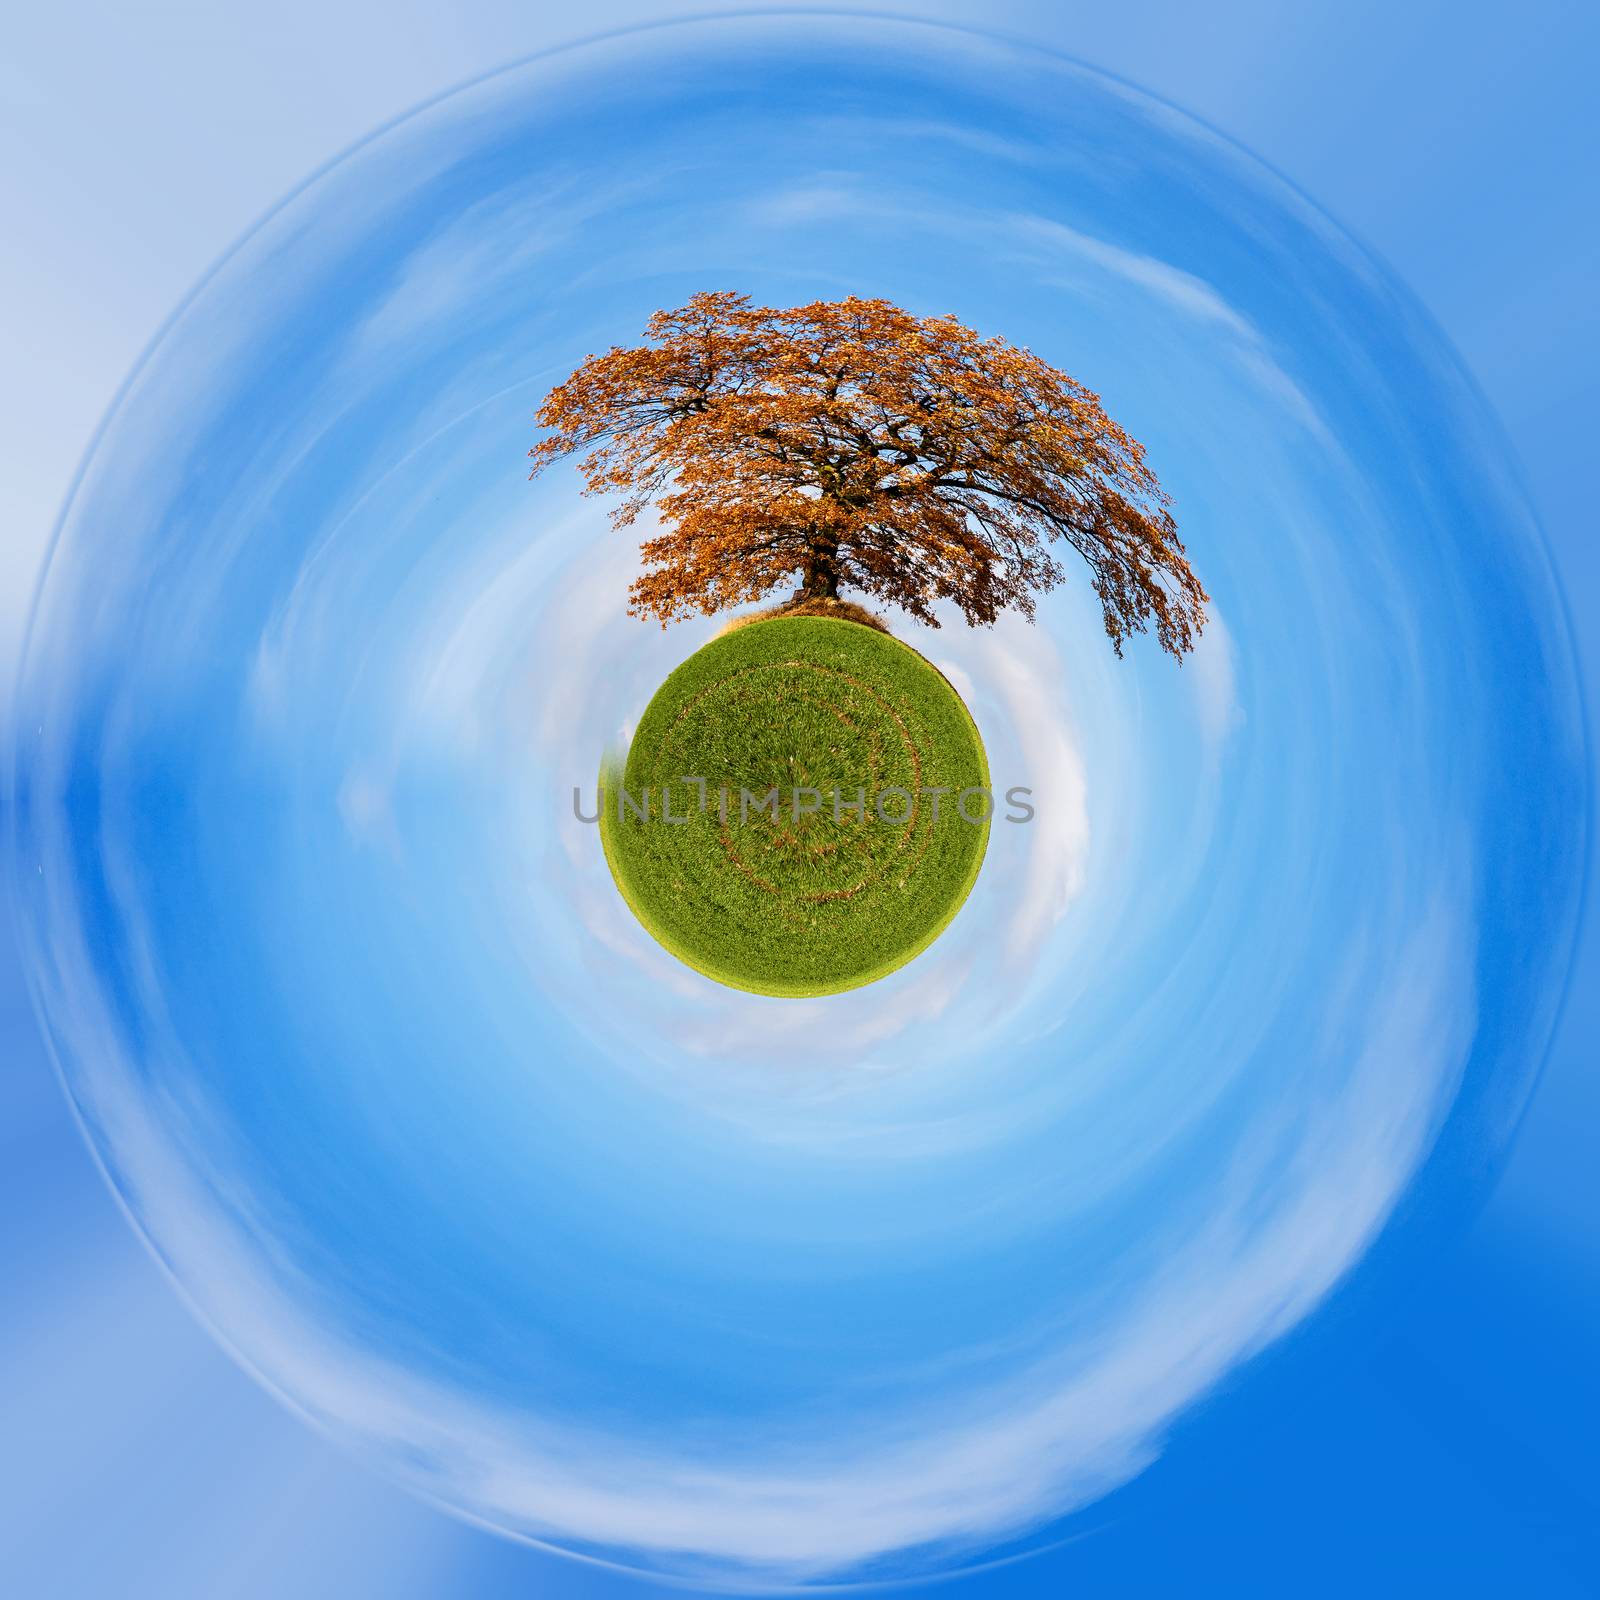 Planet of alone orange autumn tree on a green meadow and blue sky with clouds. Little planet with green grass, ecology concept. Tiny green planet projection